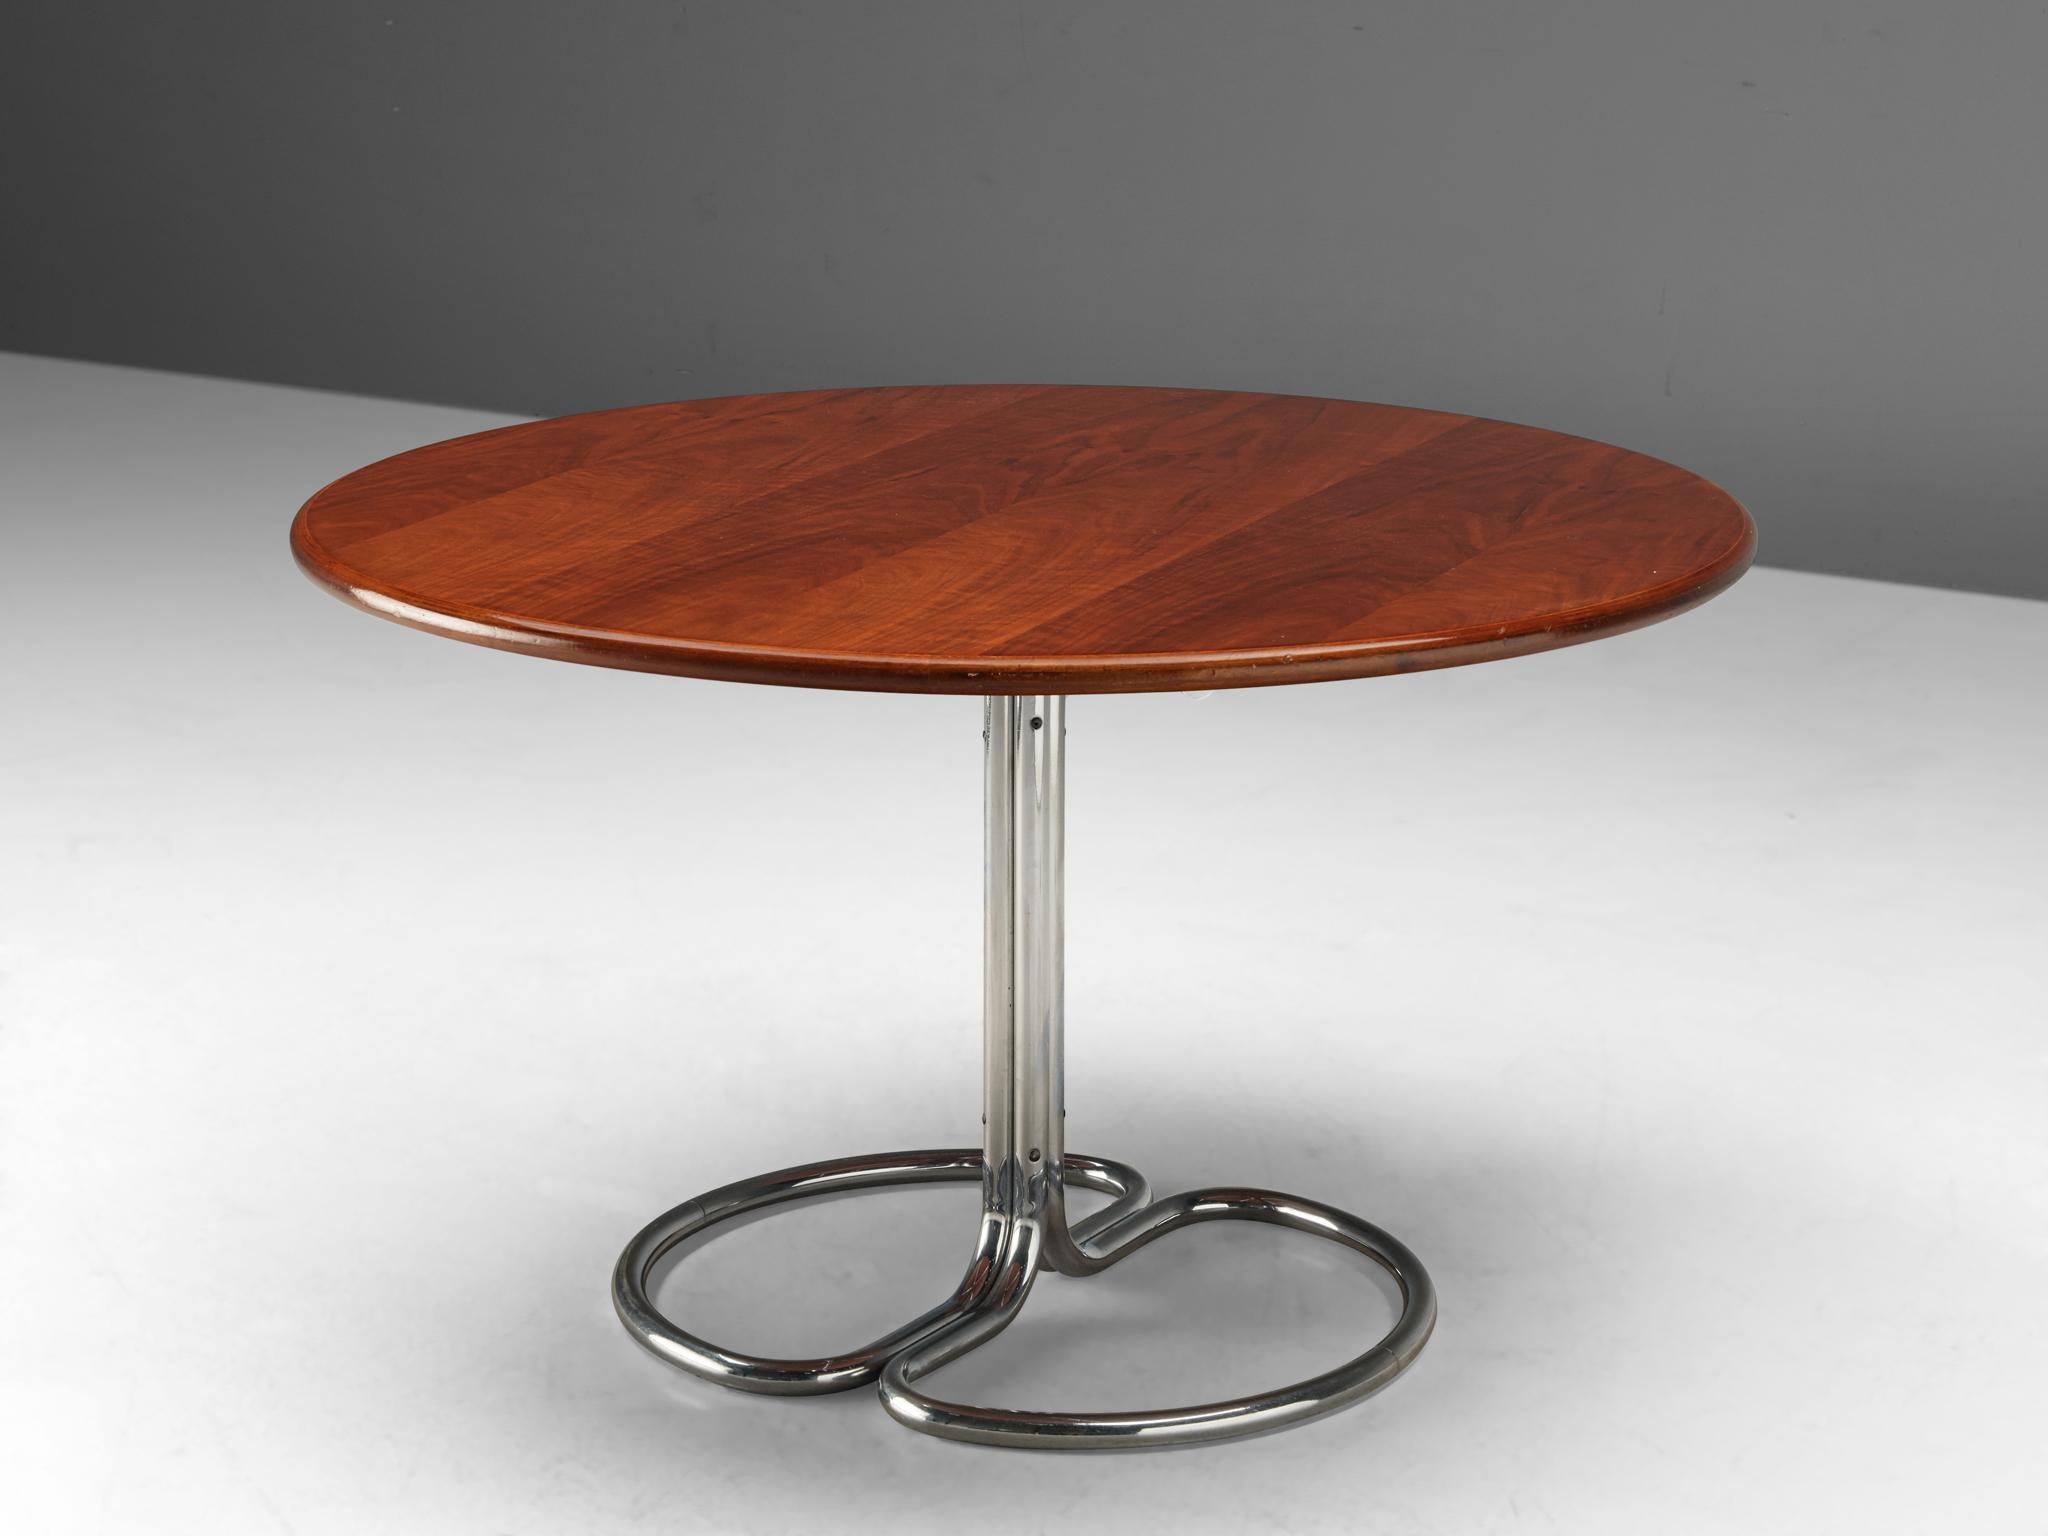 Giotto Stoppino for Bernini, 'Mayan' dining table, walnut and metal, Italy, 1960s

Round dining table by Giotto Stoppino. The walnut tabletop shows a warm, honey colored grain. It's supported by a chromed base that consists of to curved tubular